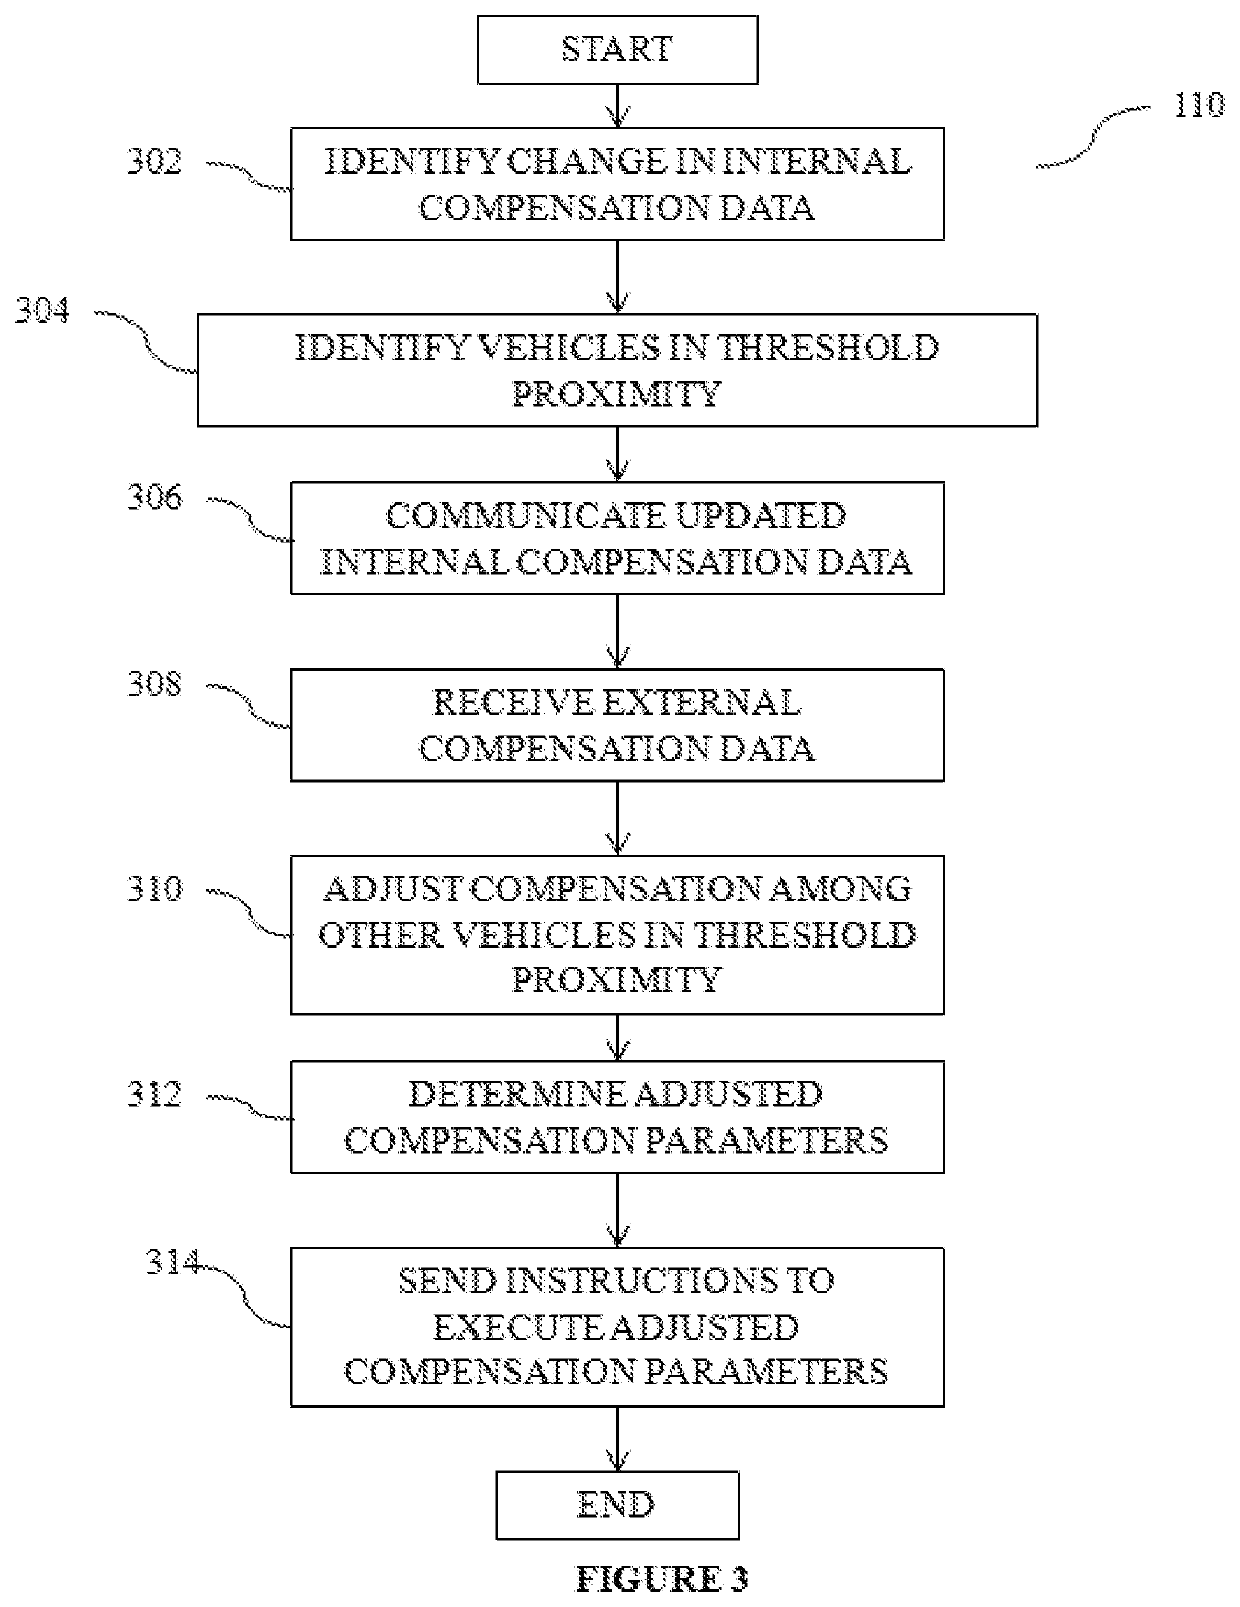 Vehicle priority-based compensation system